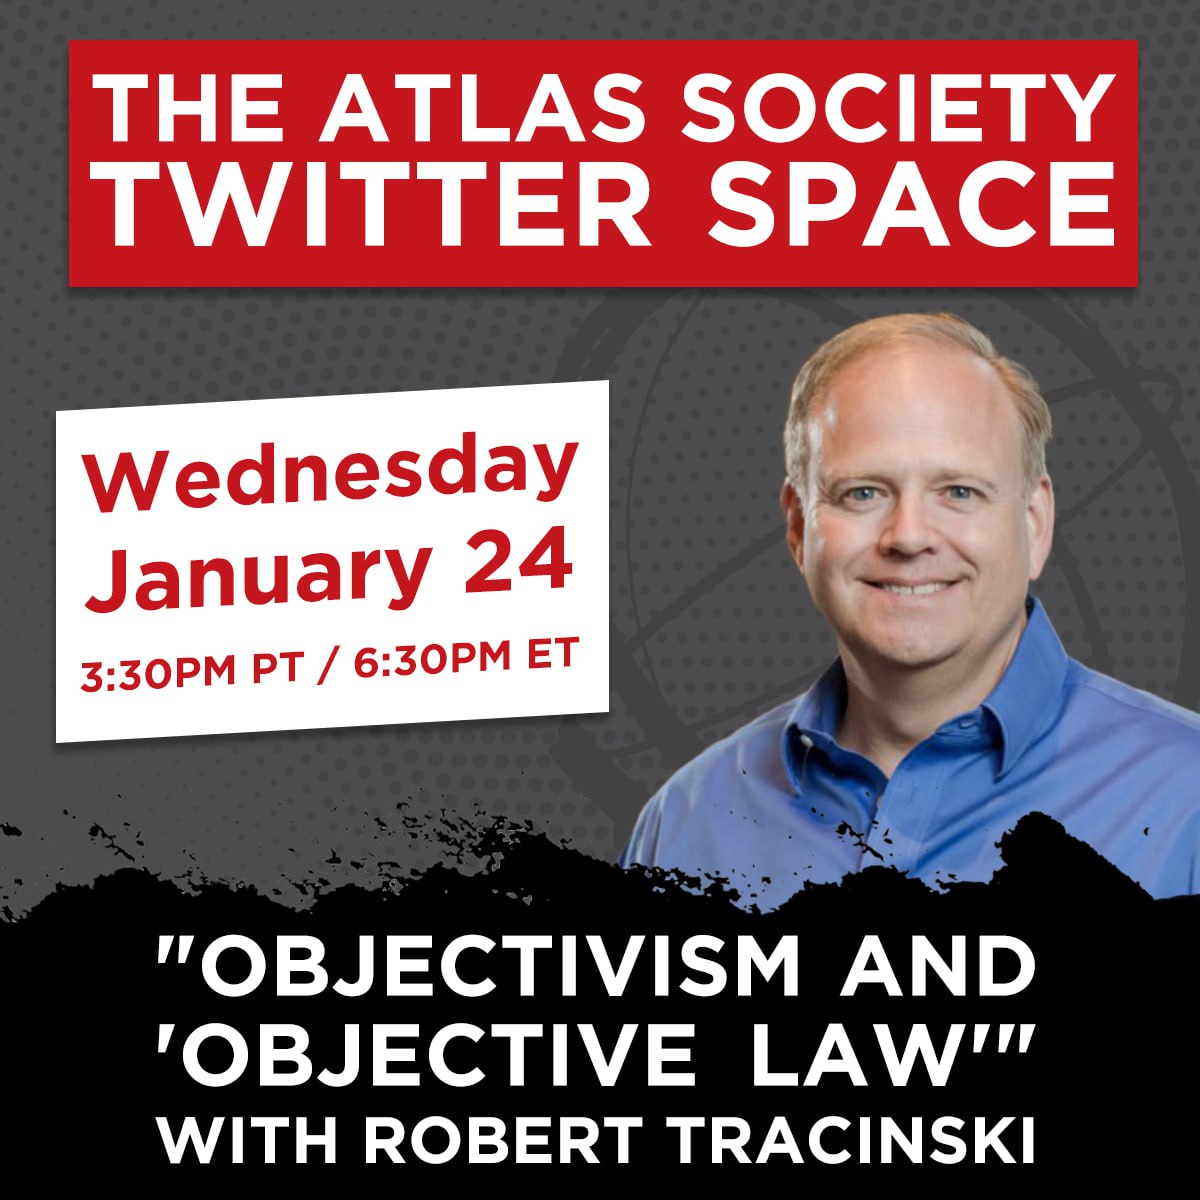 “Objectivism and Objective Law” with Robert Tracinski